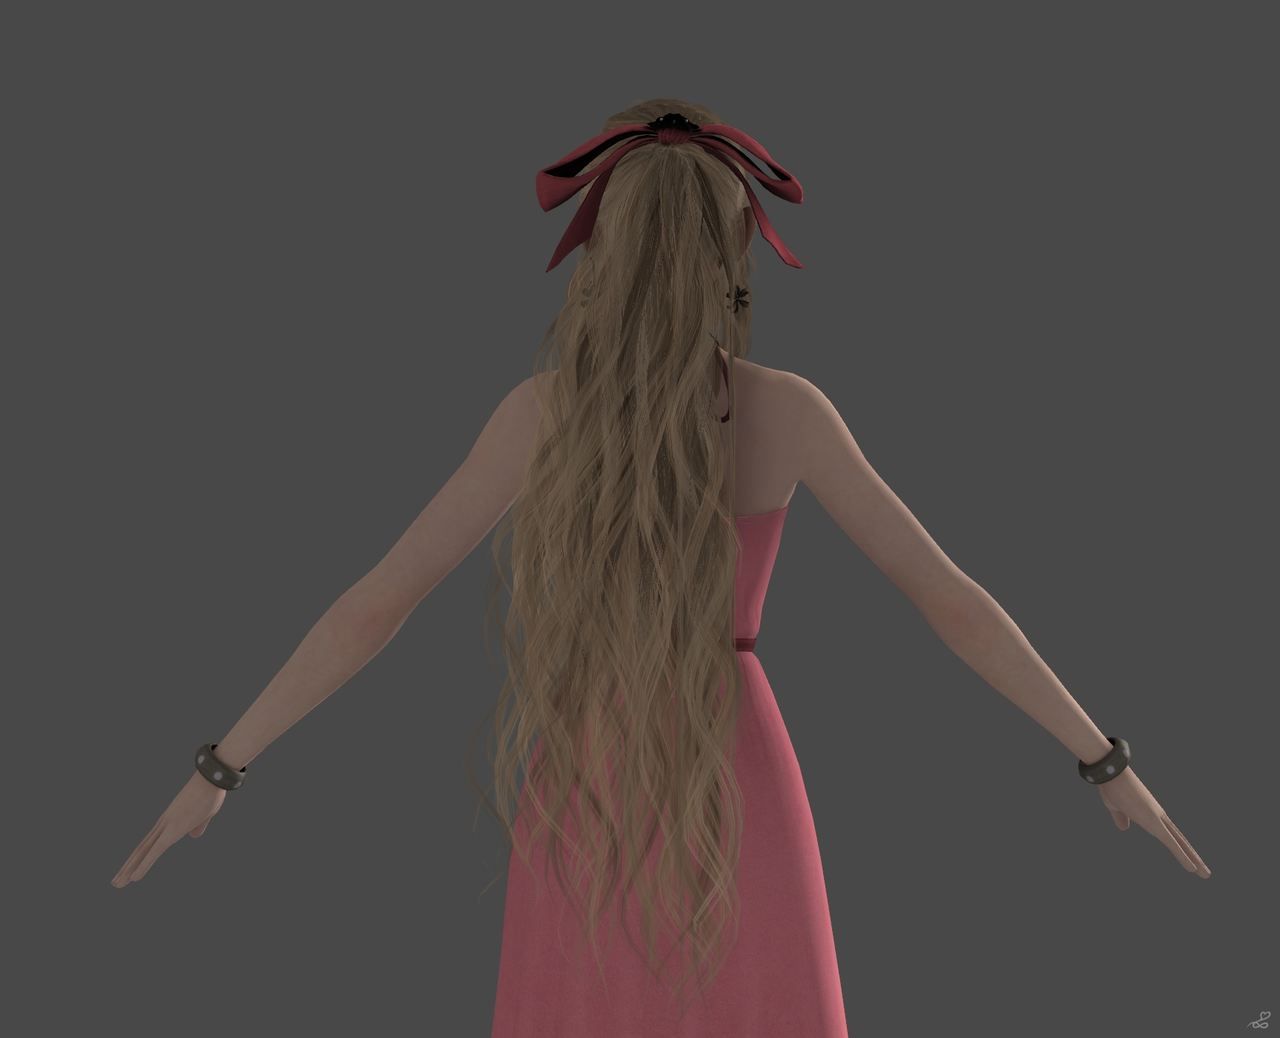 [J.A.] FF7 Remake | Aerith Reference 9